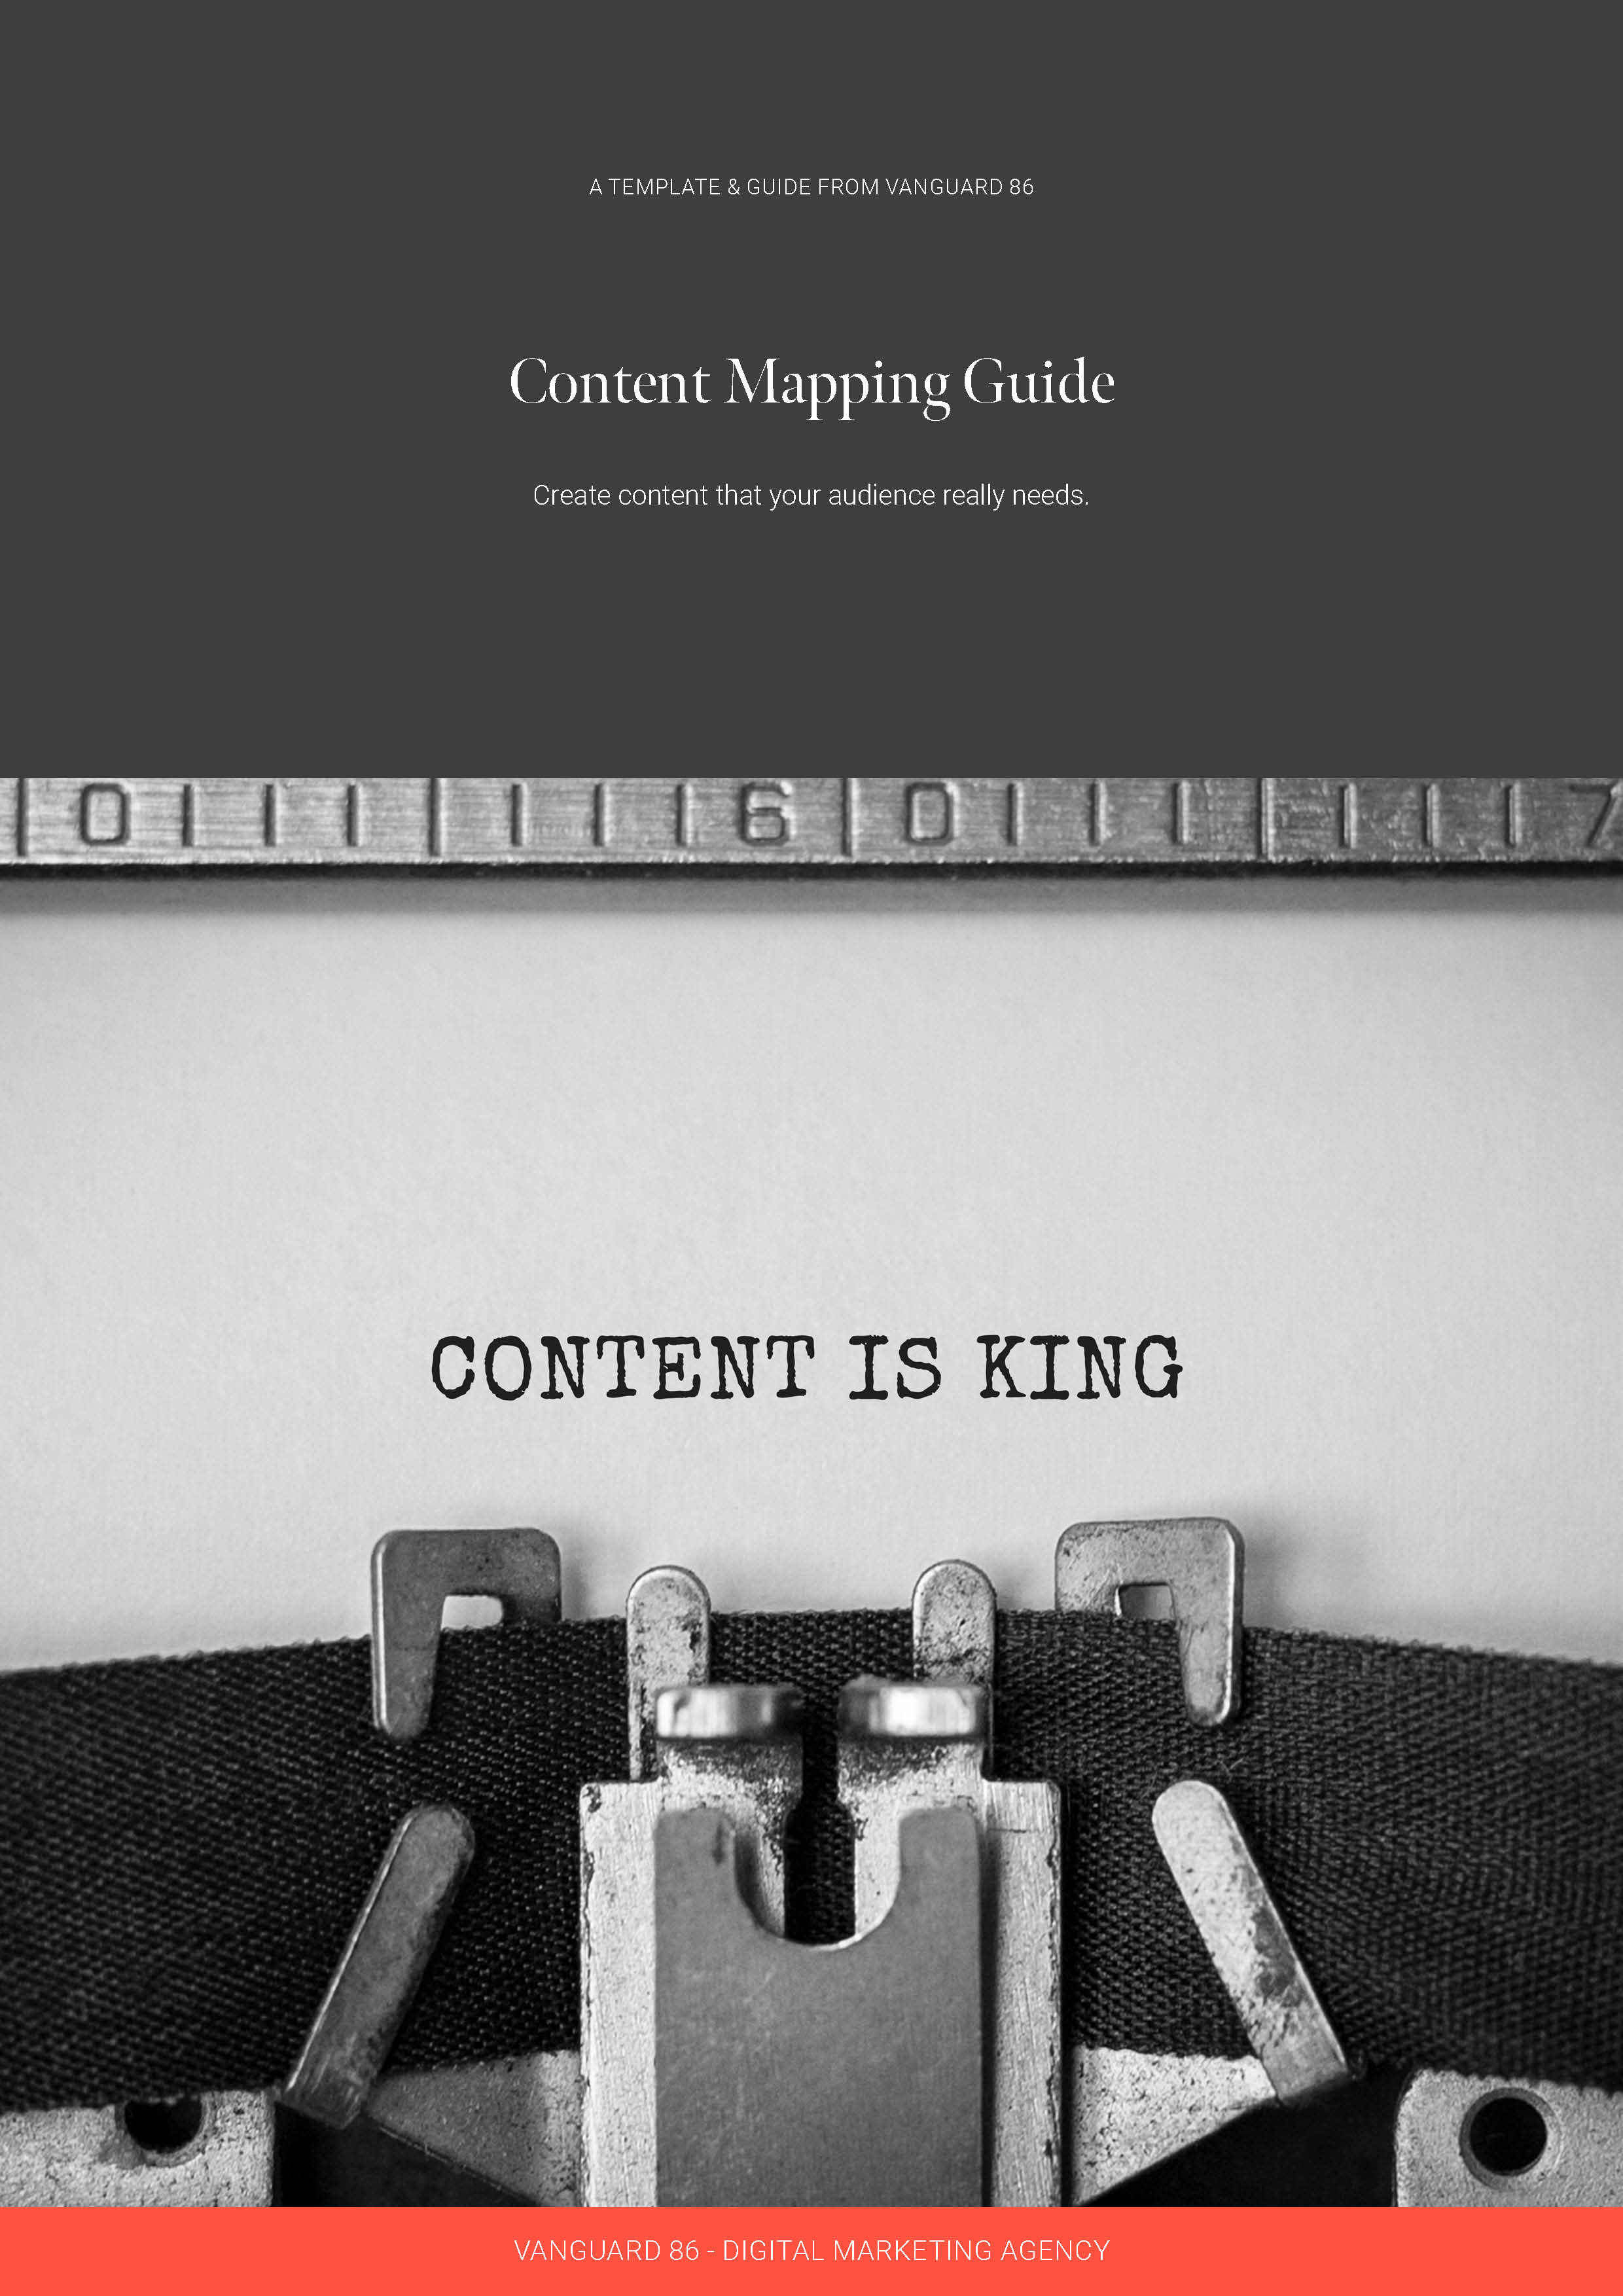 Content mapping guide